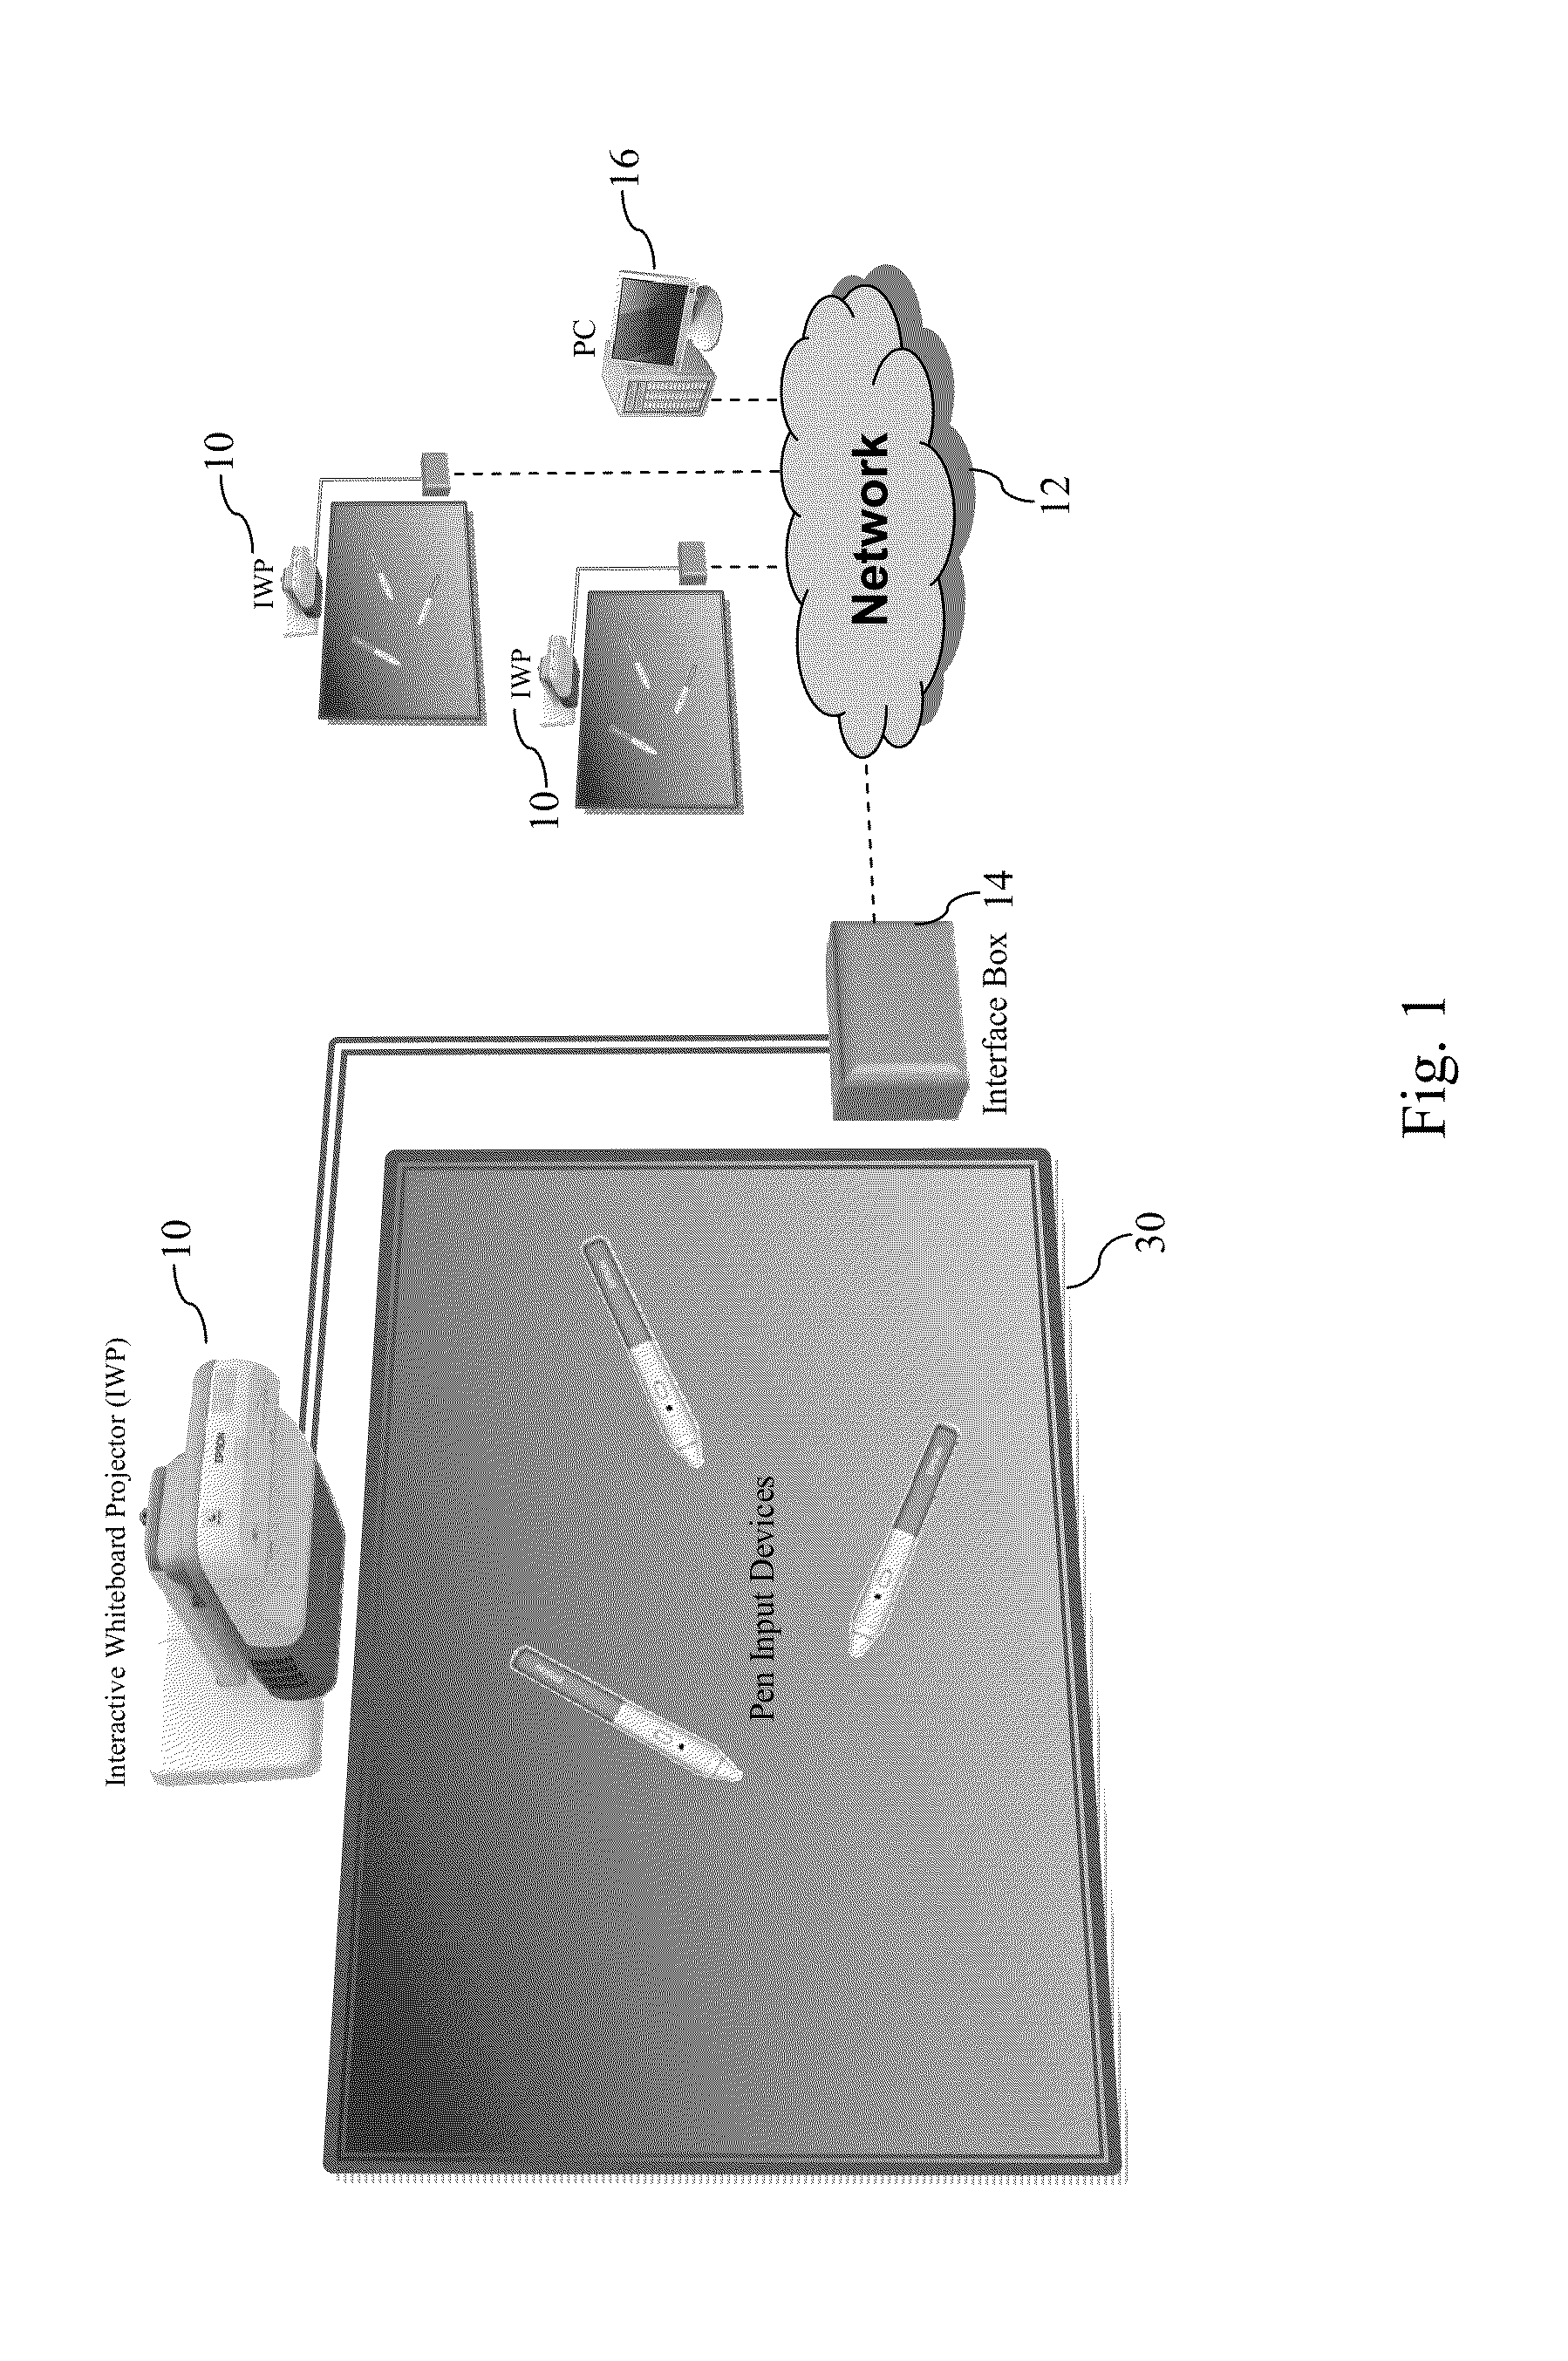 Method for providing multiple mouse inputs in a remote desktop session